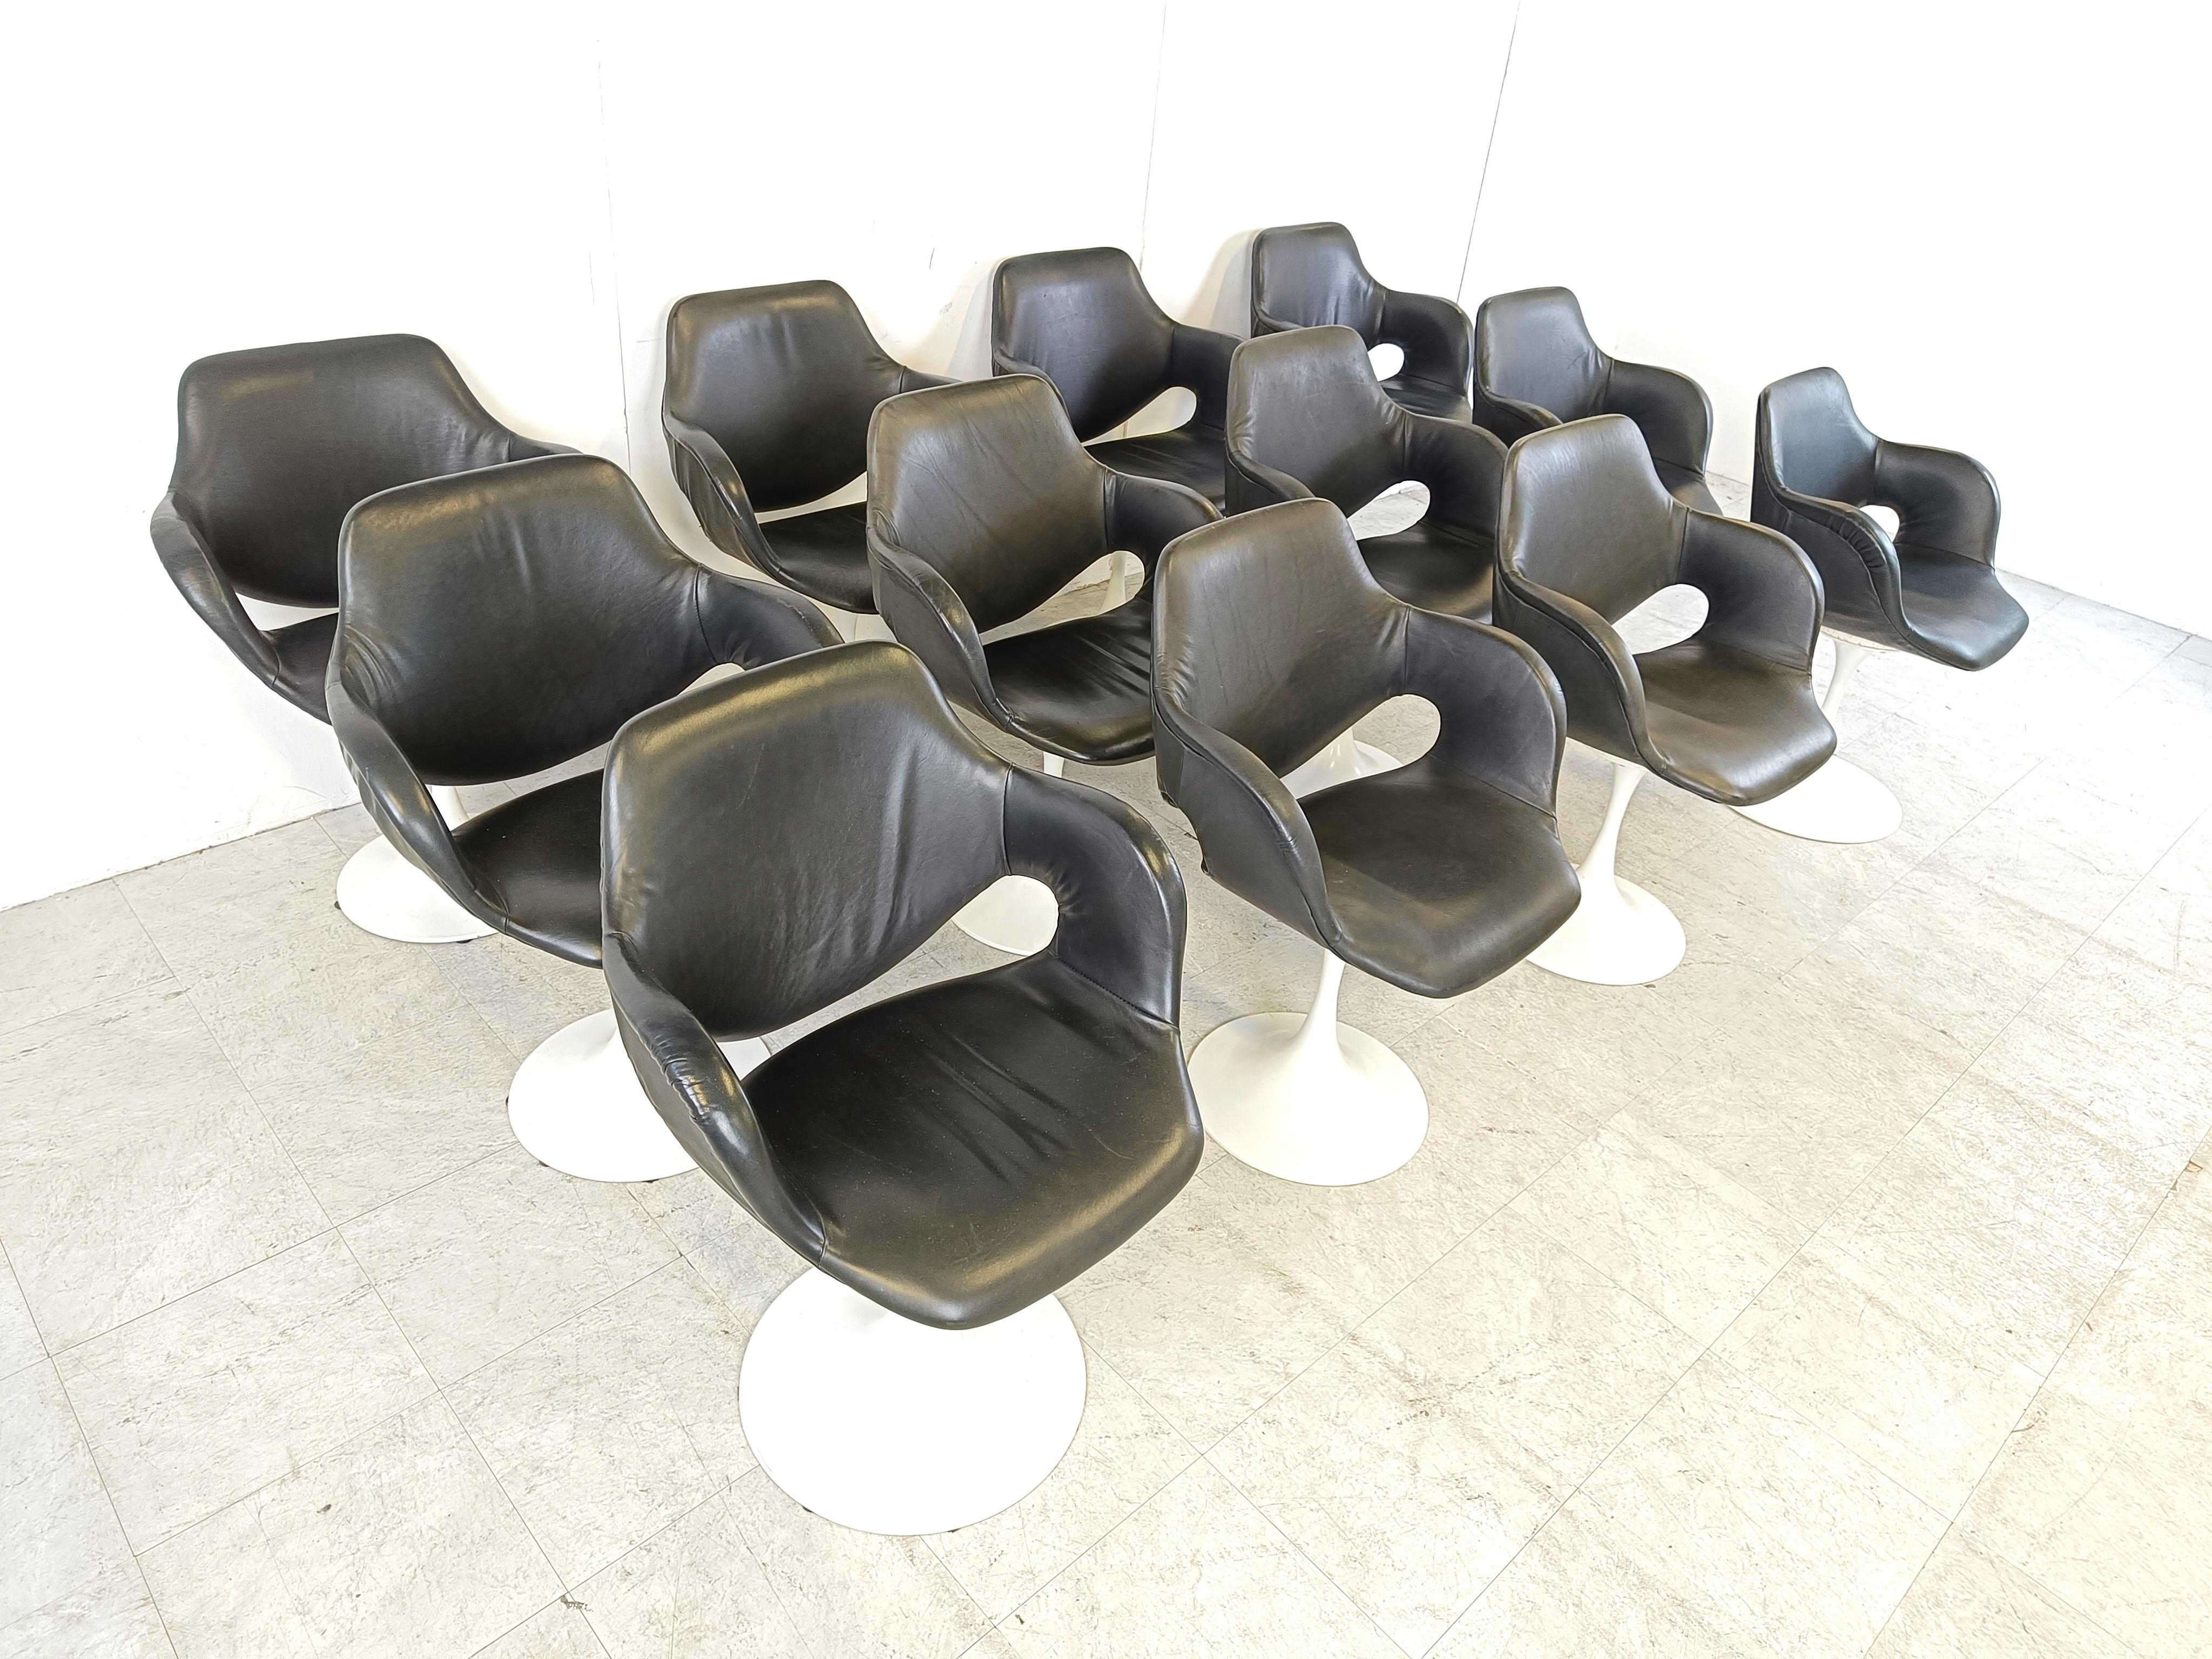 Rare set of 12 tulip base dining chairs by Boris Tabacoff.

These elegant chairs feature black skai upholstery and have a white lacquered metal tulip shaped base.

The white lacquered metal bases have some light age related wear.

Beautiful design,